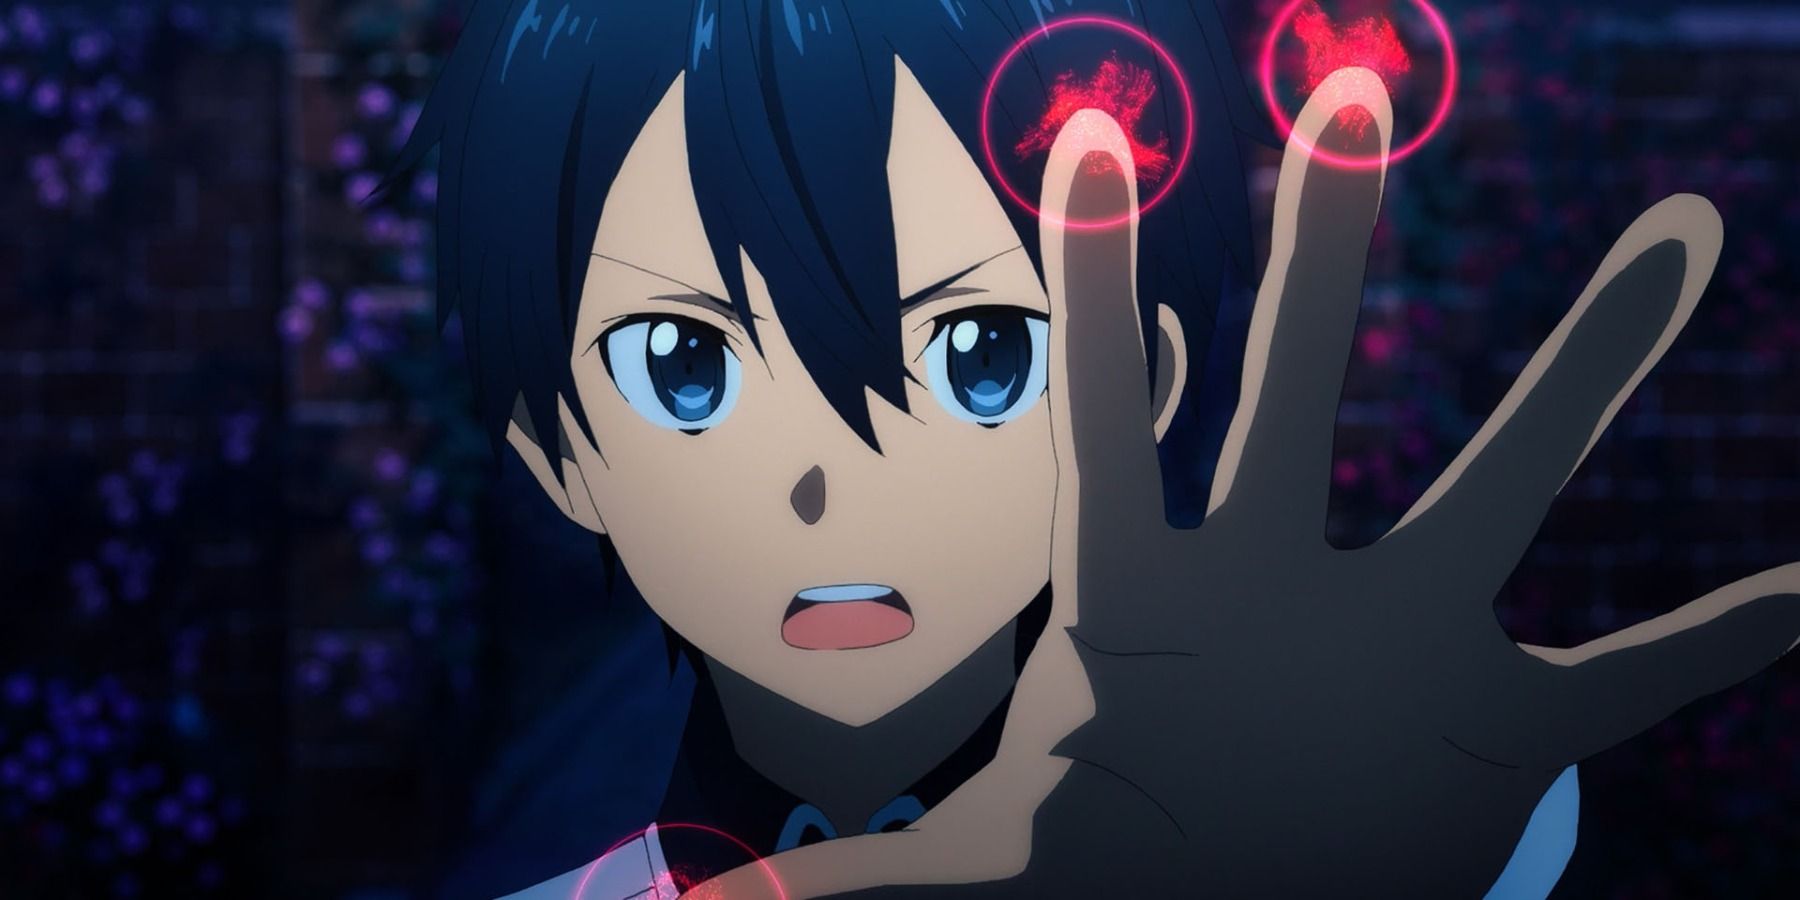 Kirito from Sword Art Online gesturing towards the camera and looking dismayed